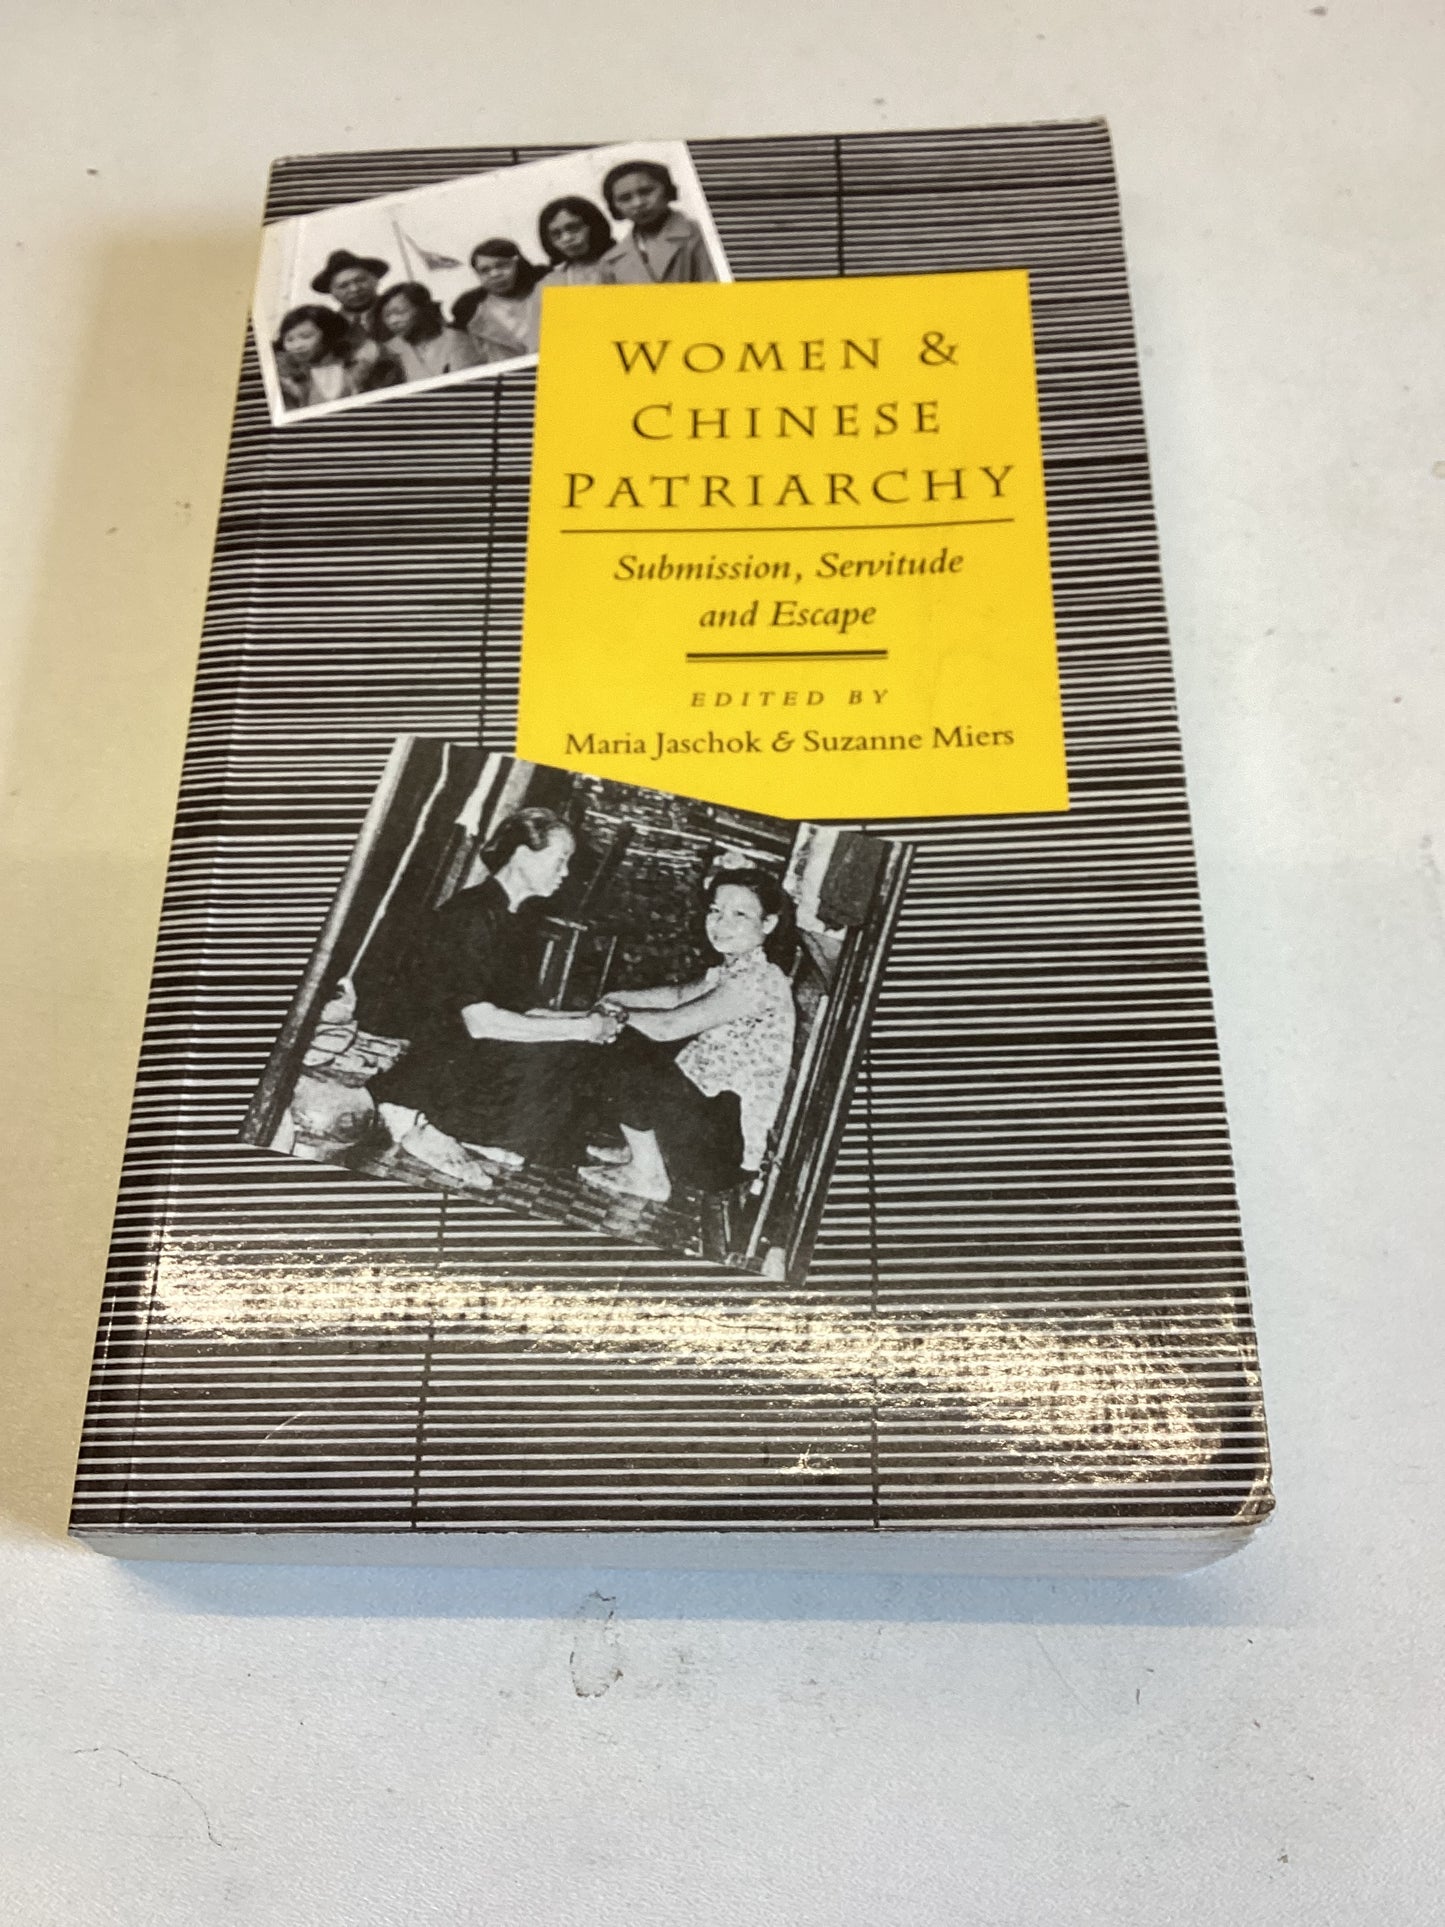 Women & Chinese Patriarchy Submission, Servitude and Escape Edited by Maria Jaschok & Suzanne Miers